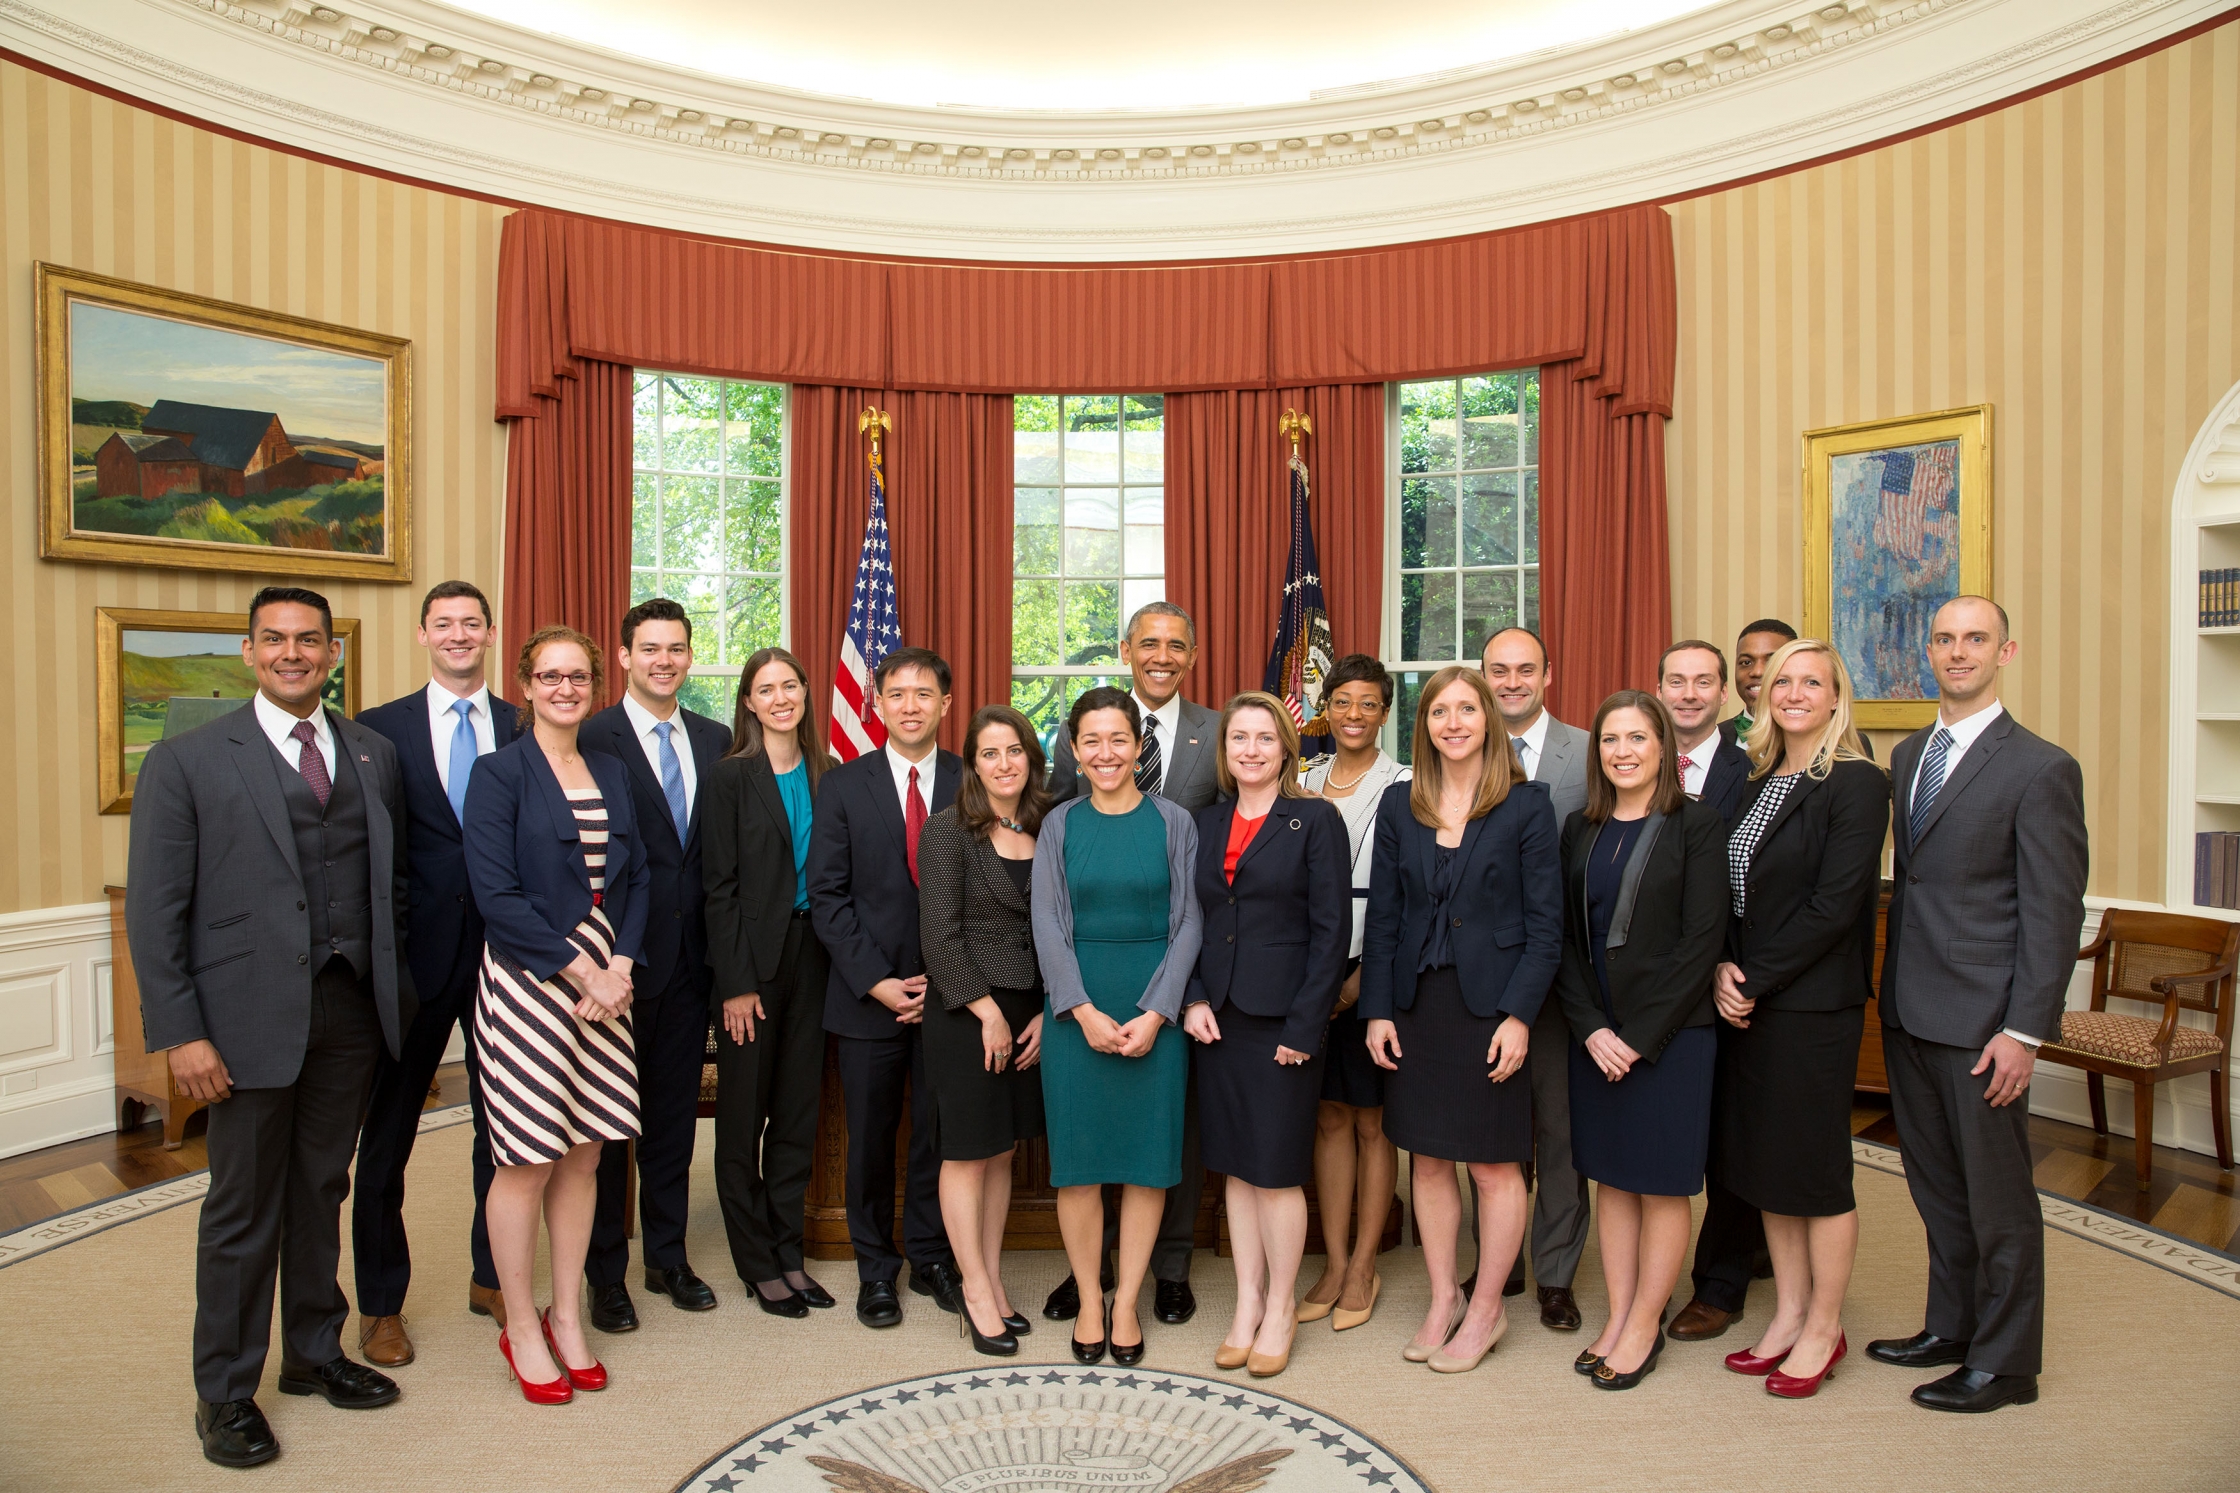 President Barack Obama poses for a group photo in the Oval Office with White House Fellows following their meeting in the Roosevelt Room of the White House, May 7, 2015. (Official White House Photo by Chuck Kennedy)